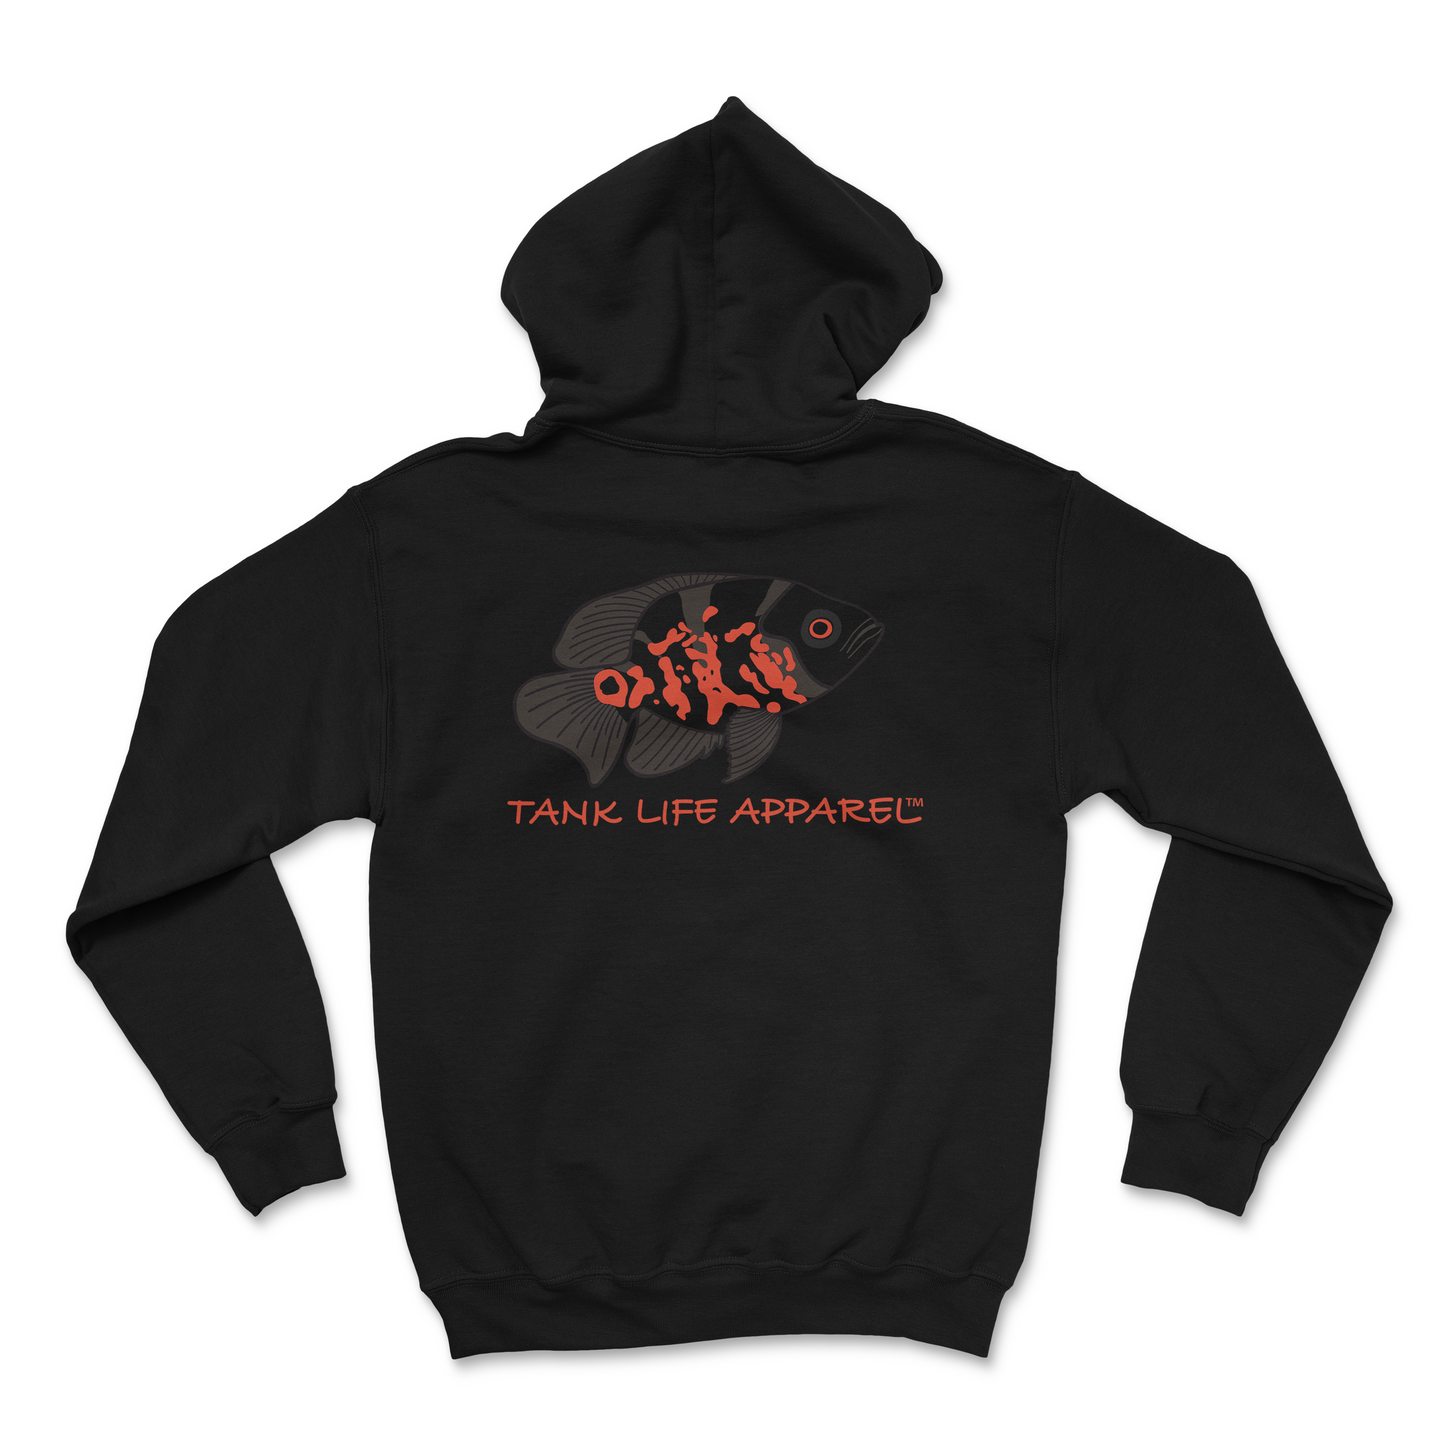 The Tank Life Apparel Tiger Oscar cichlid design on the back of a super soft and comfortable hoodie. Black and gray with orange fish.